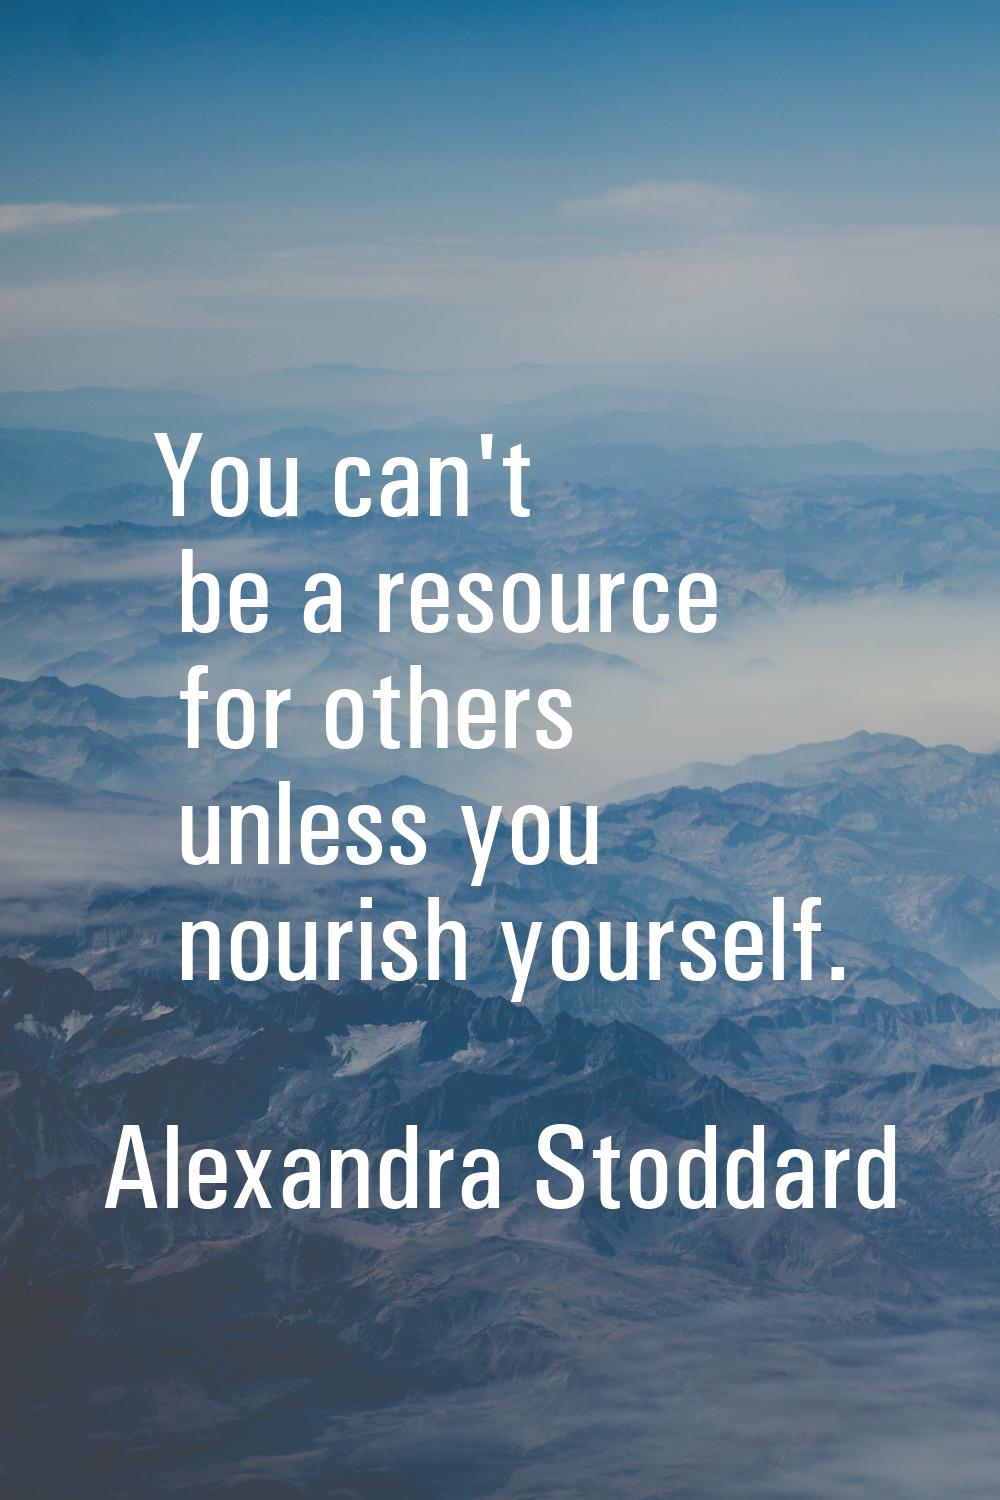 You can't be a resource for others unless you nourish yourself.